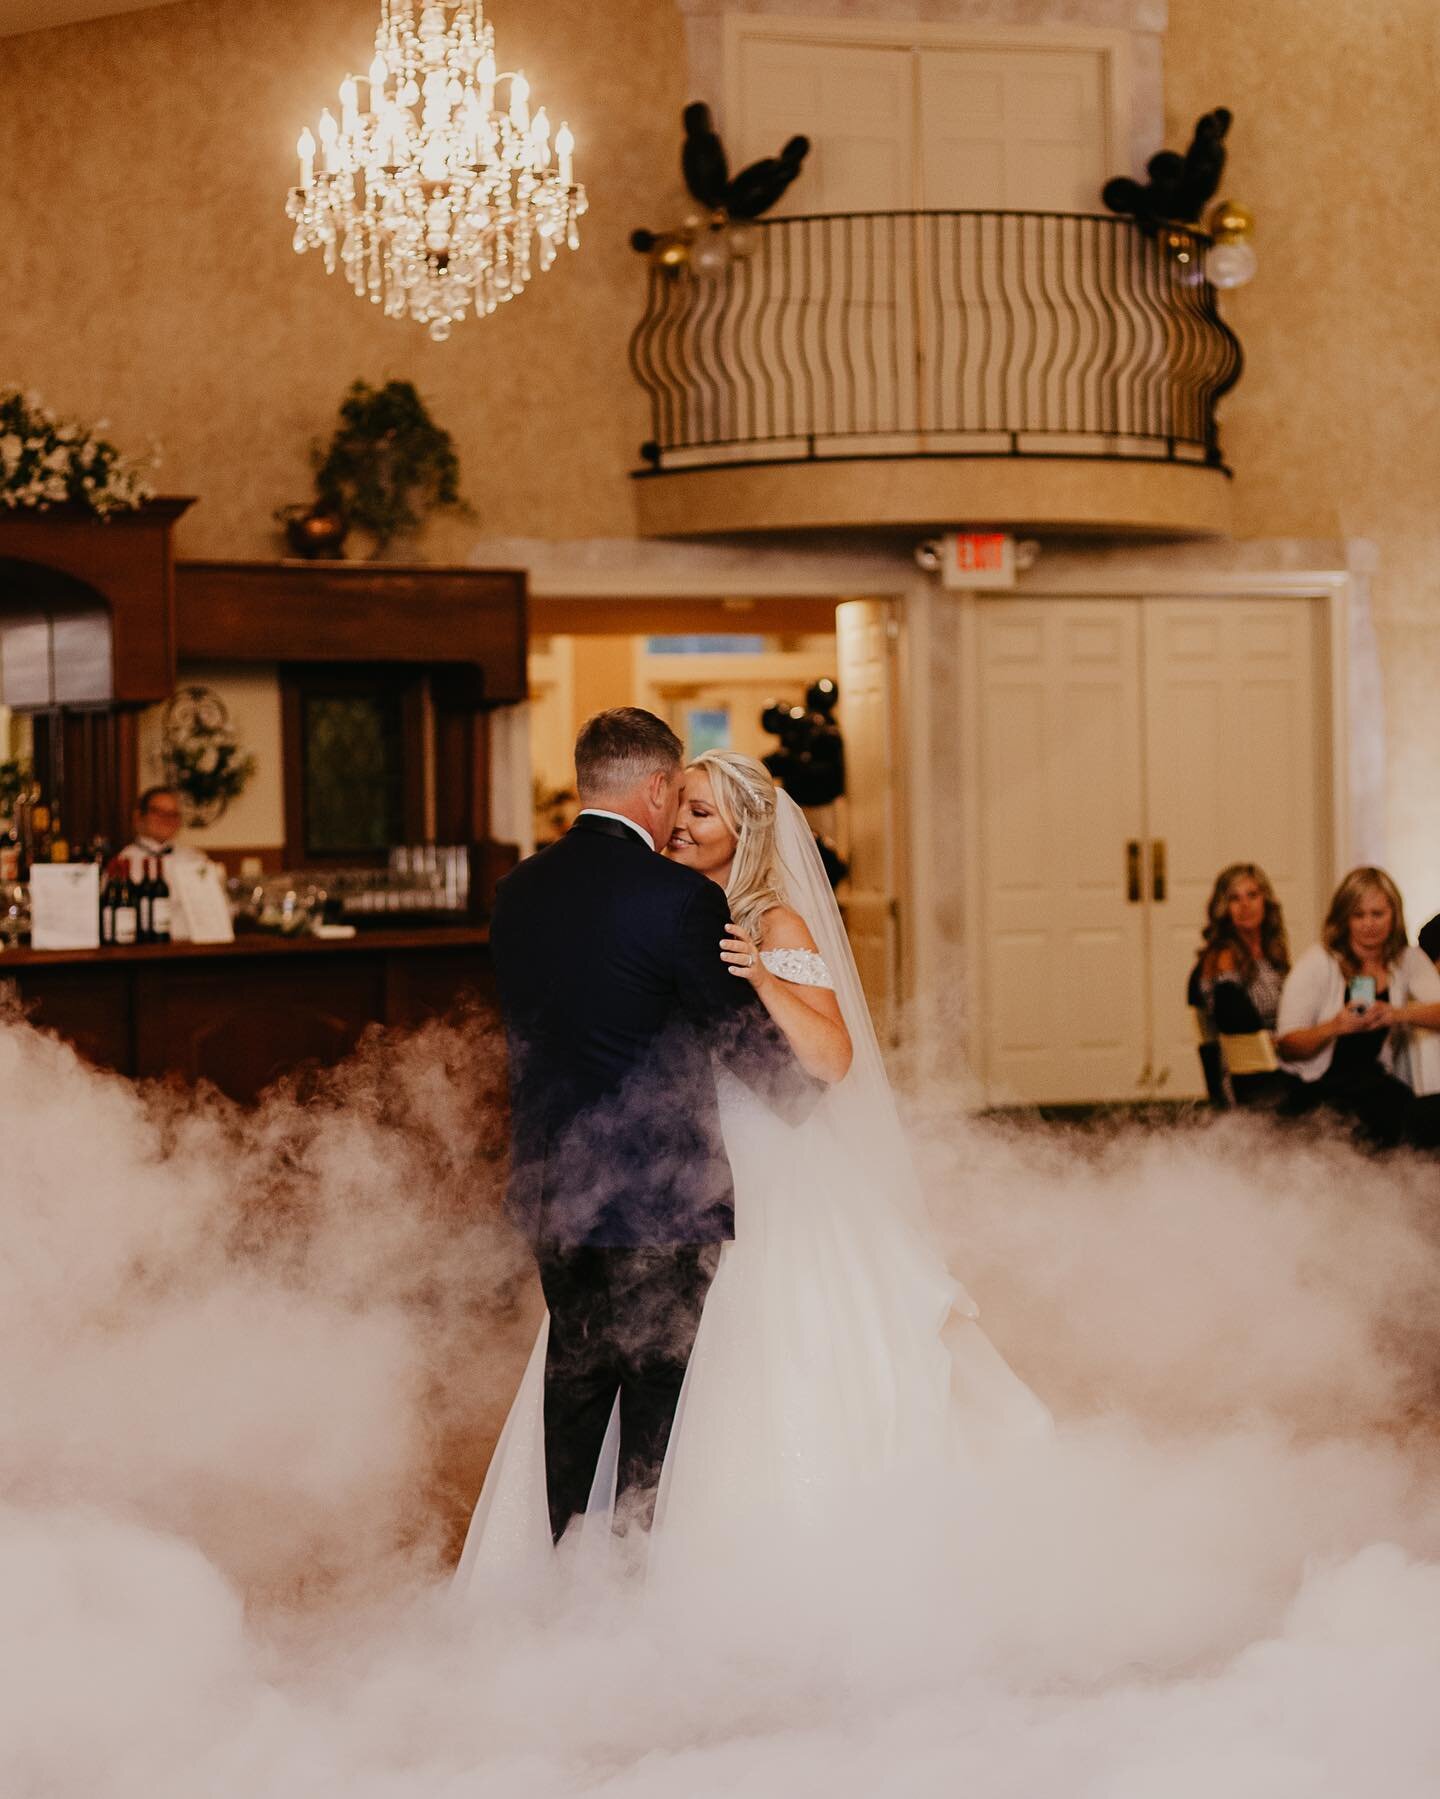 Dancing in the clouds for your first dance ✨🌥️ #ohioweddingphotographer #cincinnatiweddingphotographer #fairytalewedding #firstdance #disneywedding